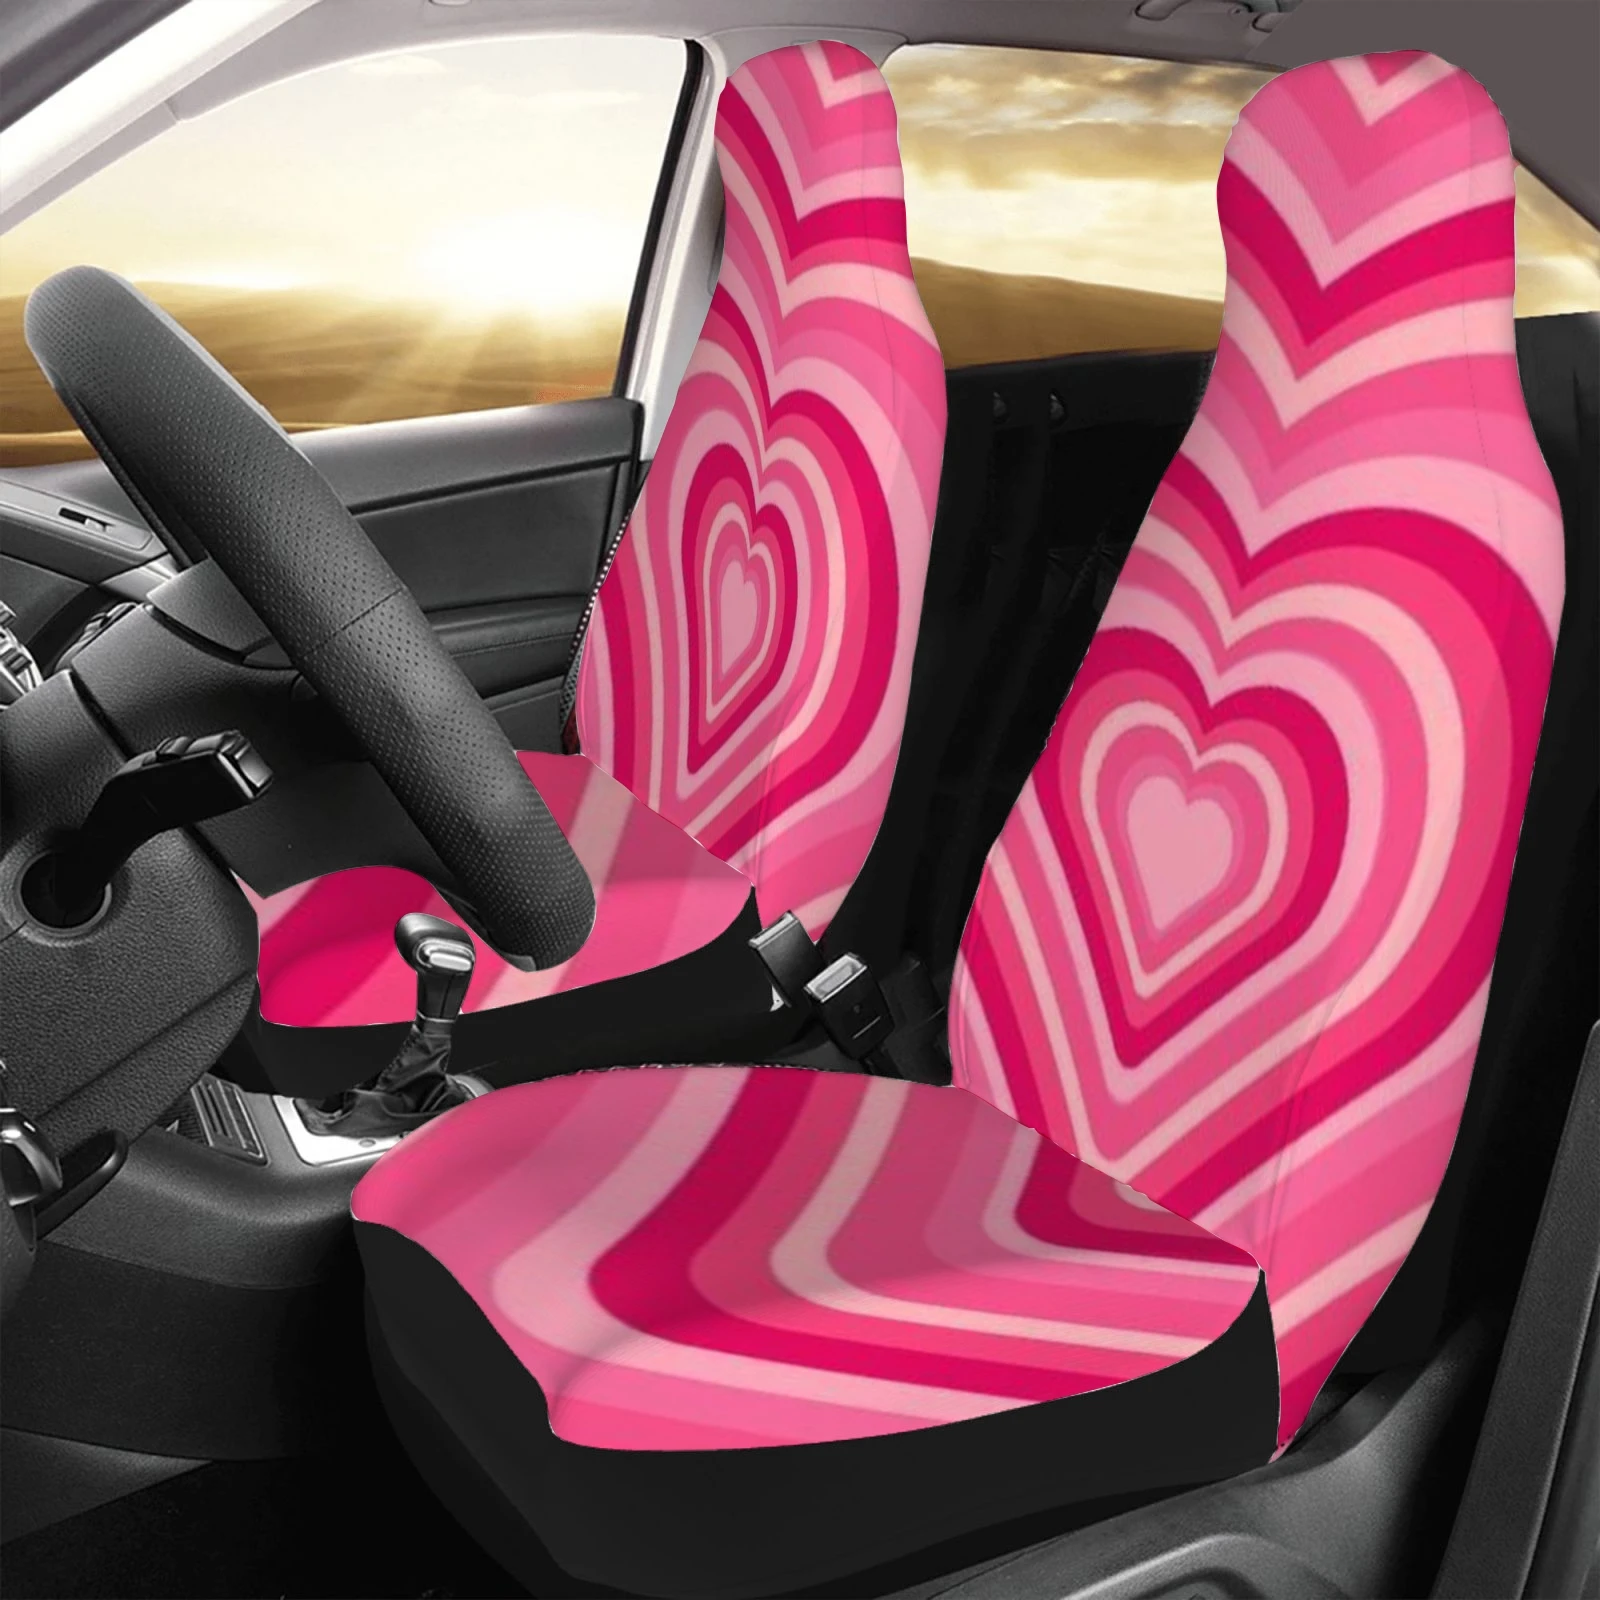 

Full Love heart cartoon car accessories Front Seat Covers Set of 2 for Vehicle Car SUV Truck Van Seat Protector Accessory Deco